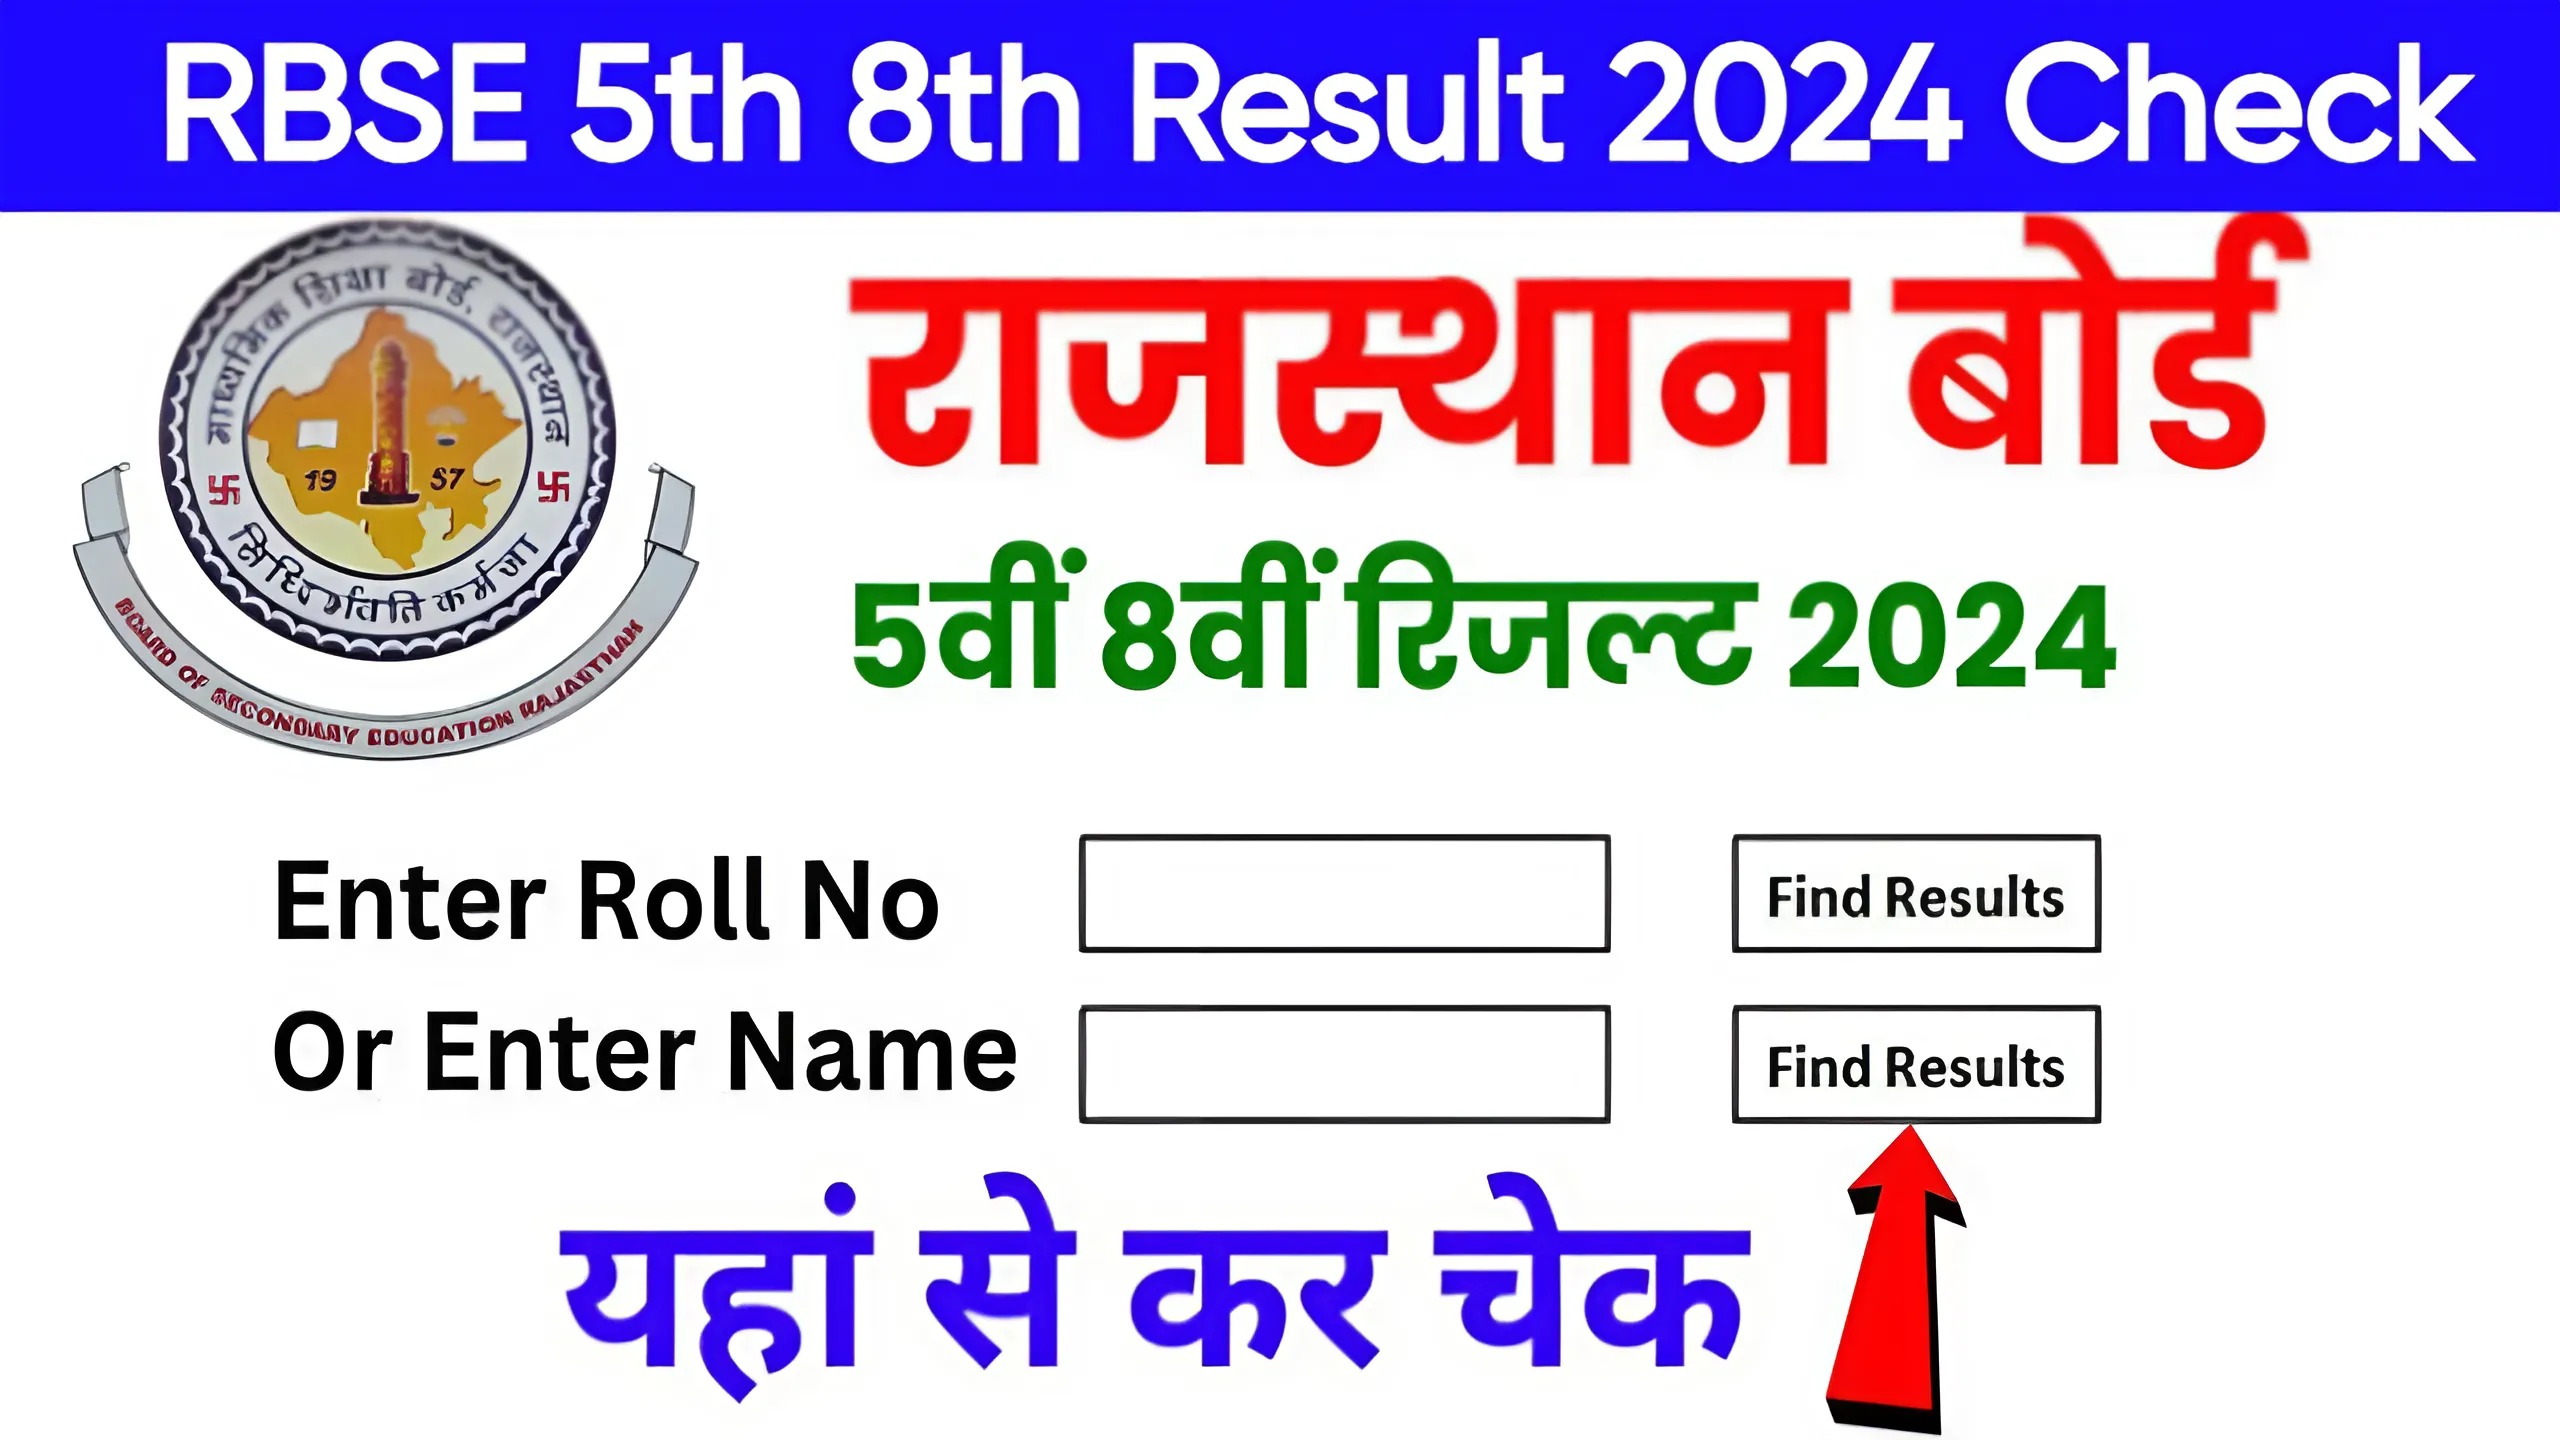 RBSE 5th 8th Result 2024 Check